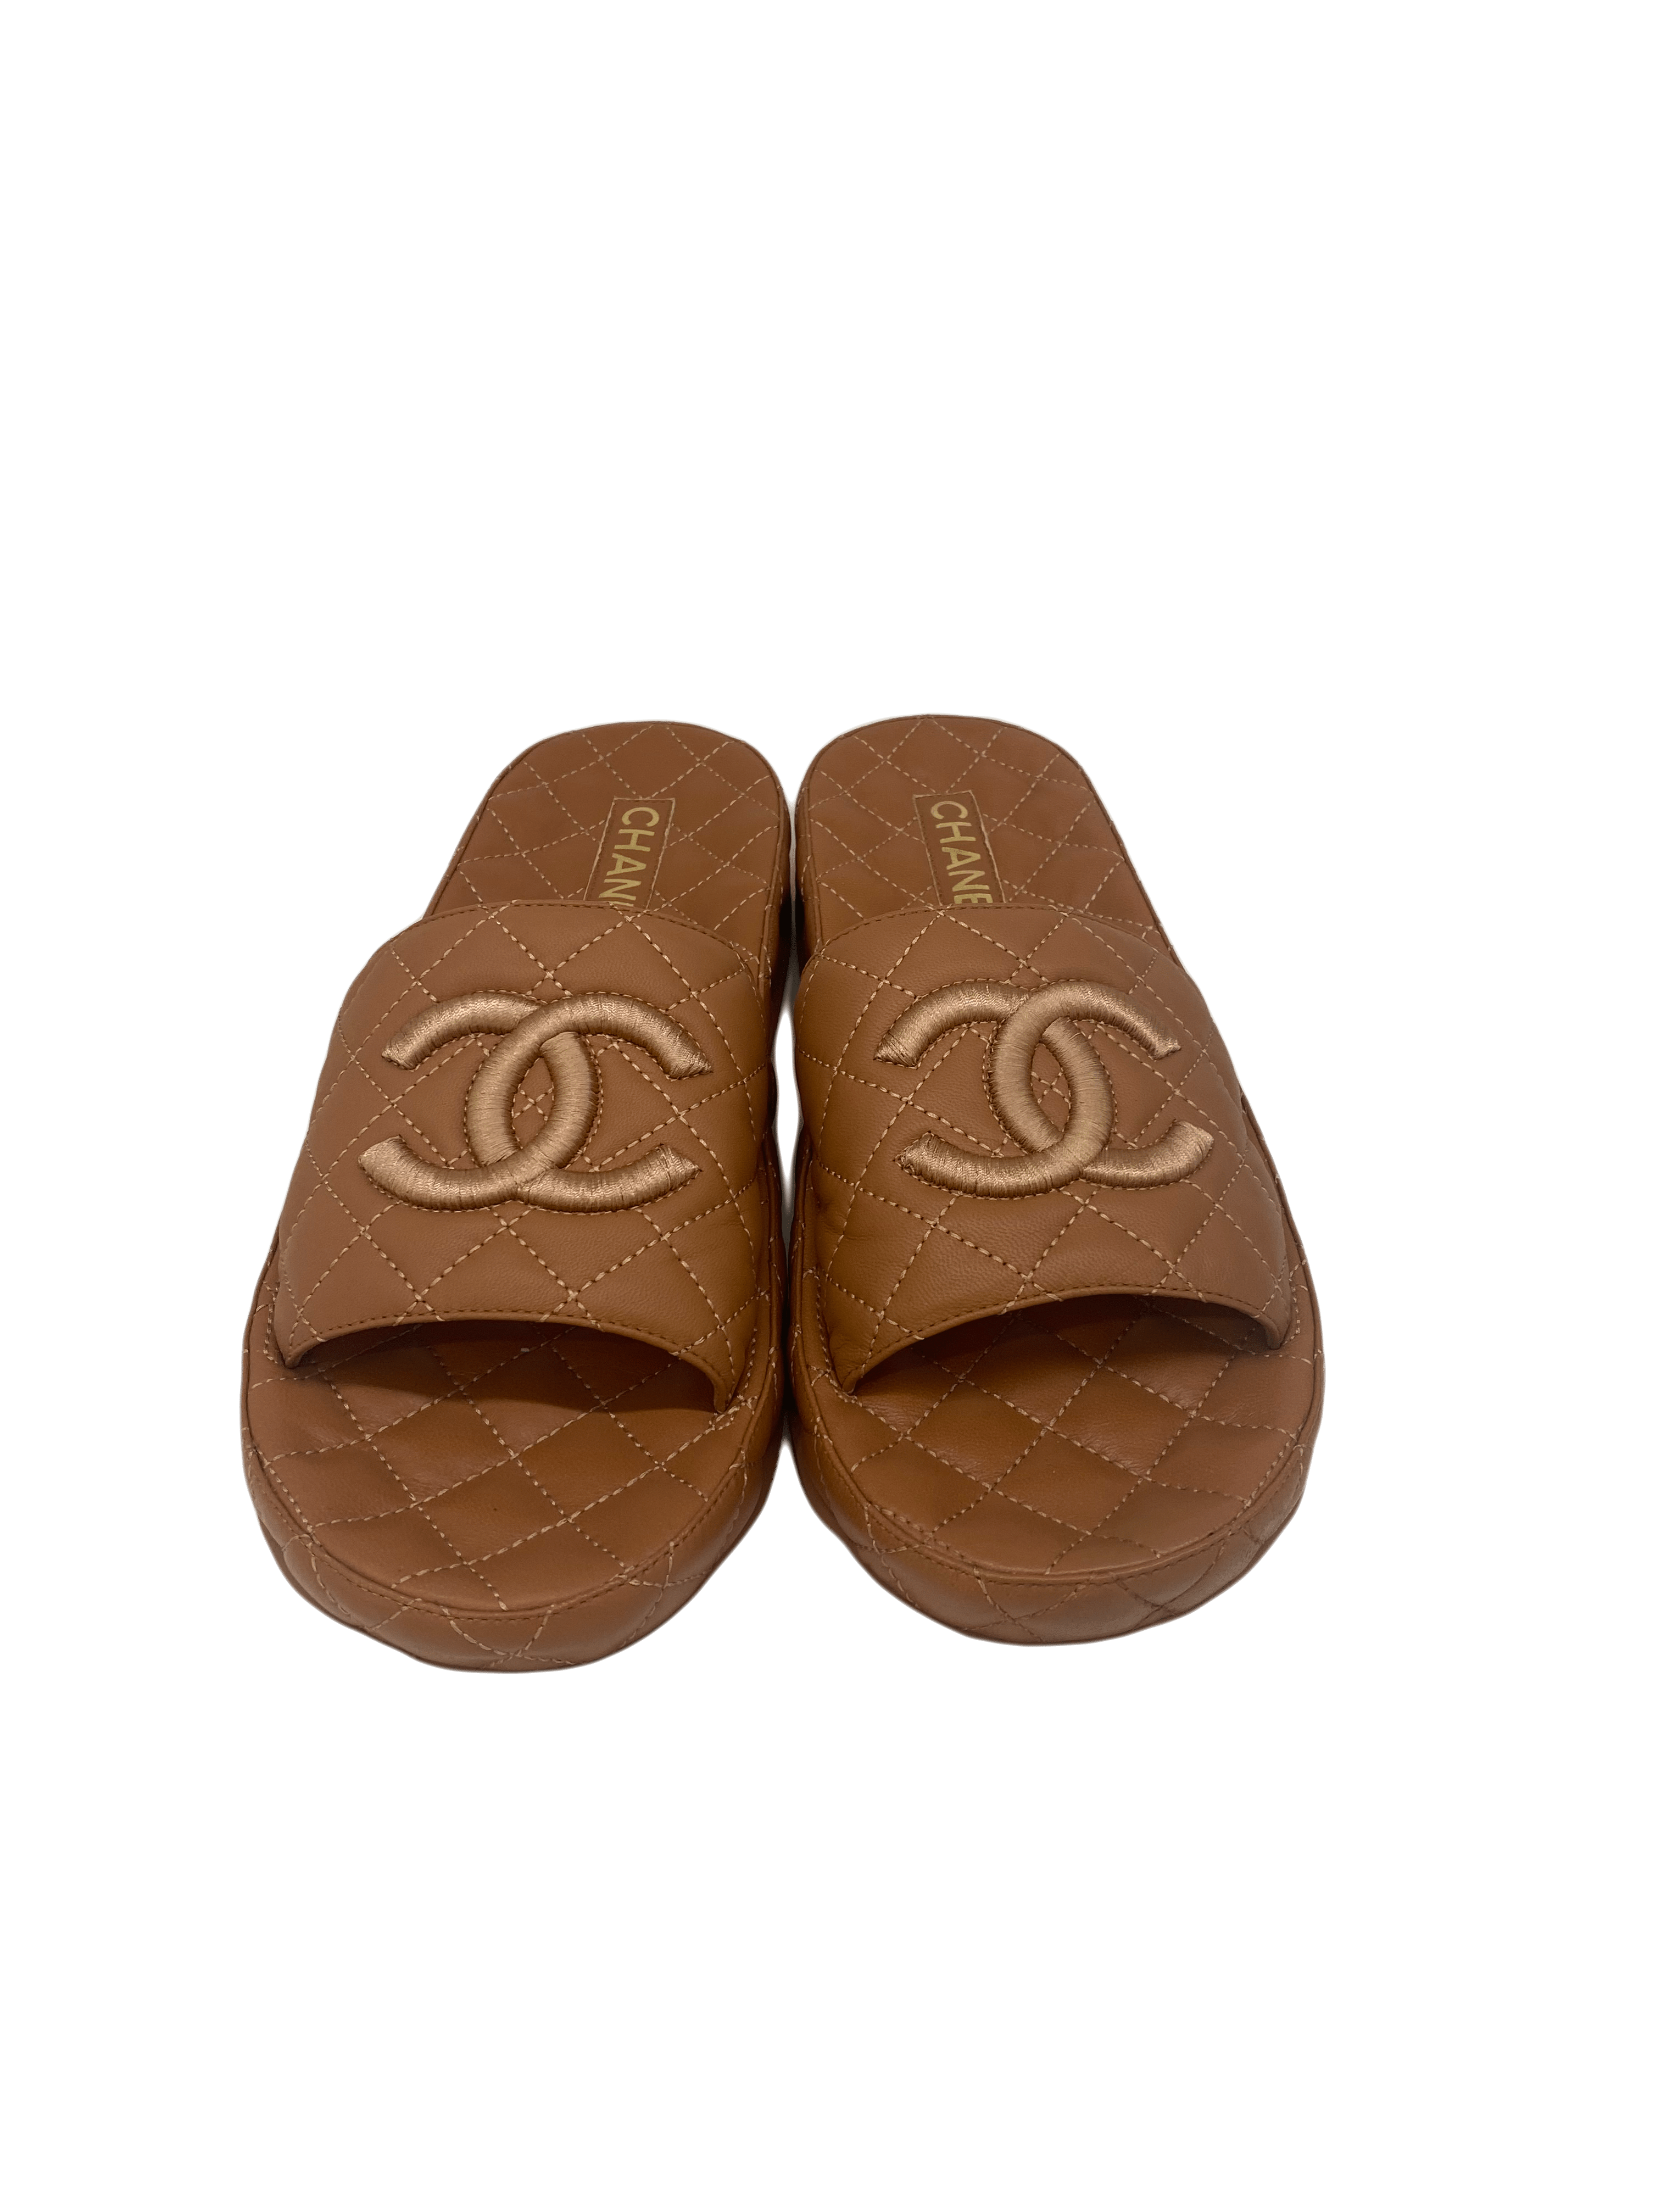 PH Luxury Consignment Chanel Caramel Quilted Slides - Size 41